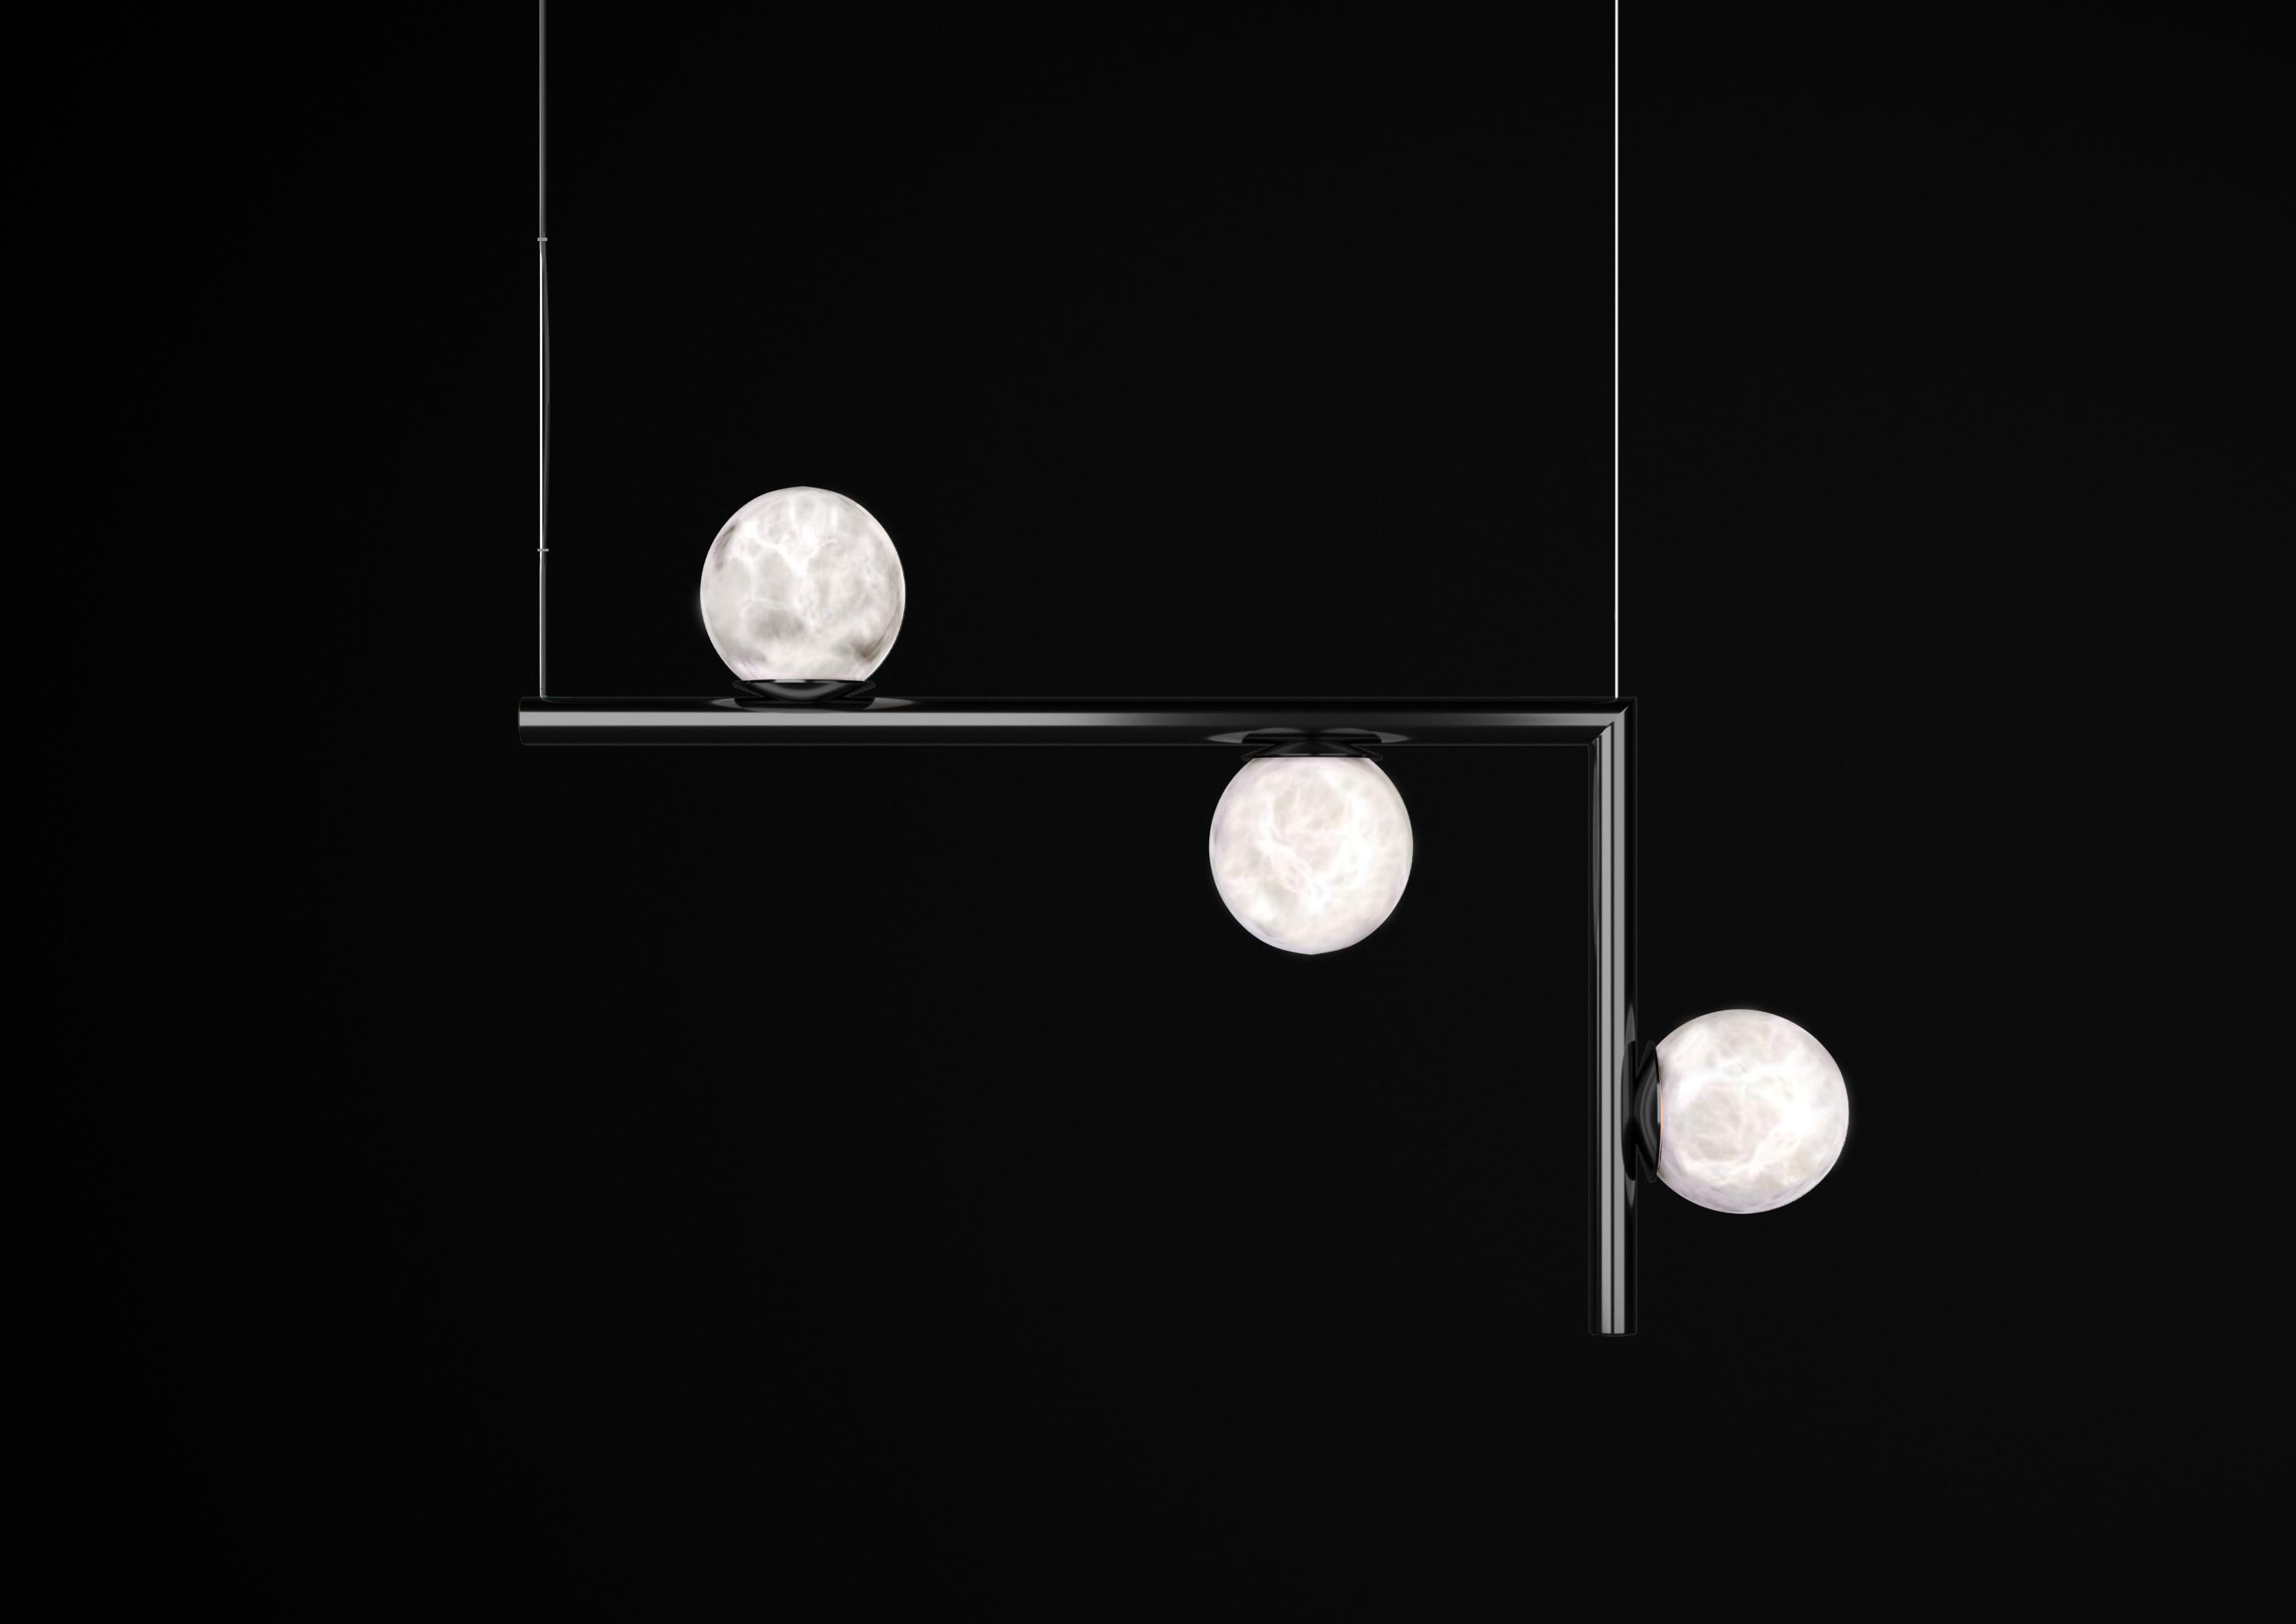 Ofione 2 Shiny Black Metal Pendant Lamp by Alabastro Italiano
Dimensions: D 14 x W 85 x H 55 cm.
Materials: White alabaster and metal.

Available in different finishes: Shiny Silver, Bronze, Brushed Brass, Ruggine of Florence, Brushed Burnished,